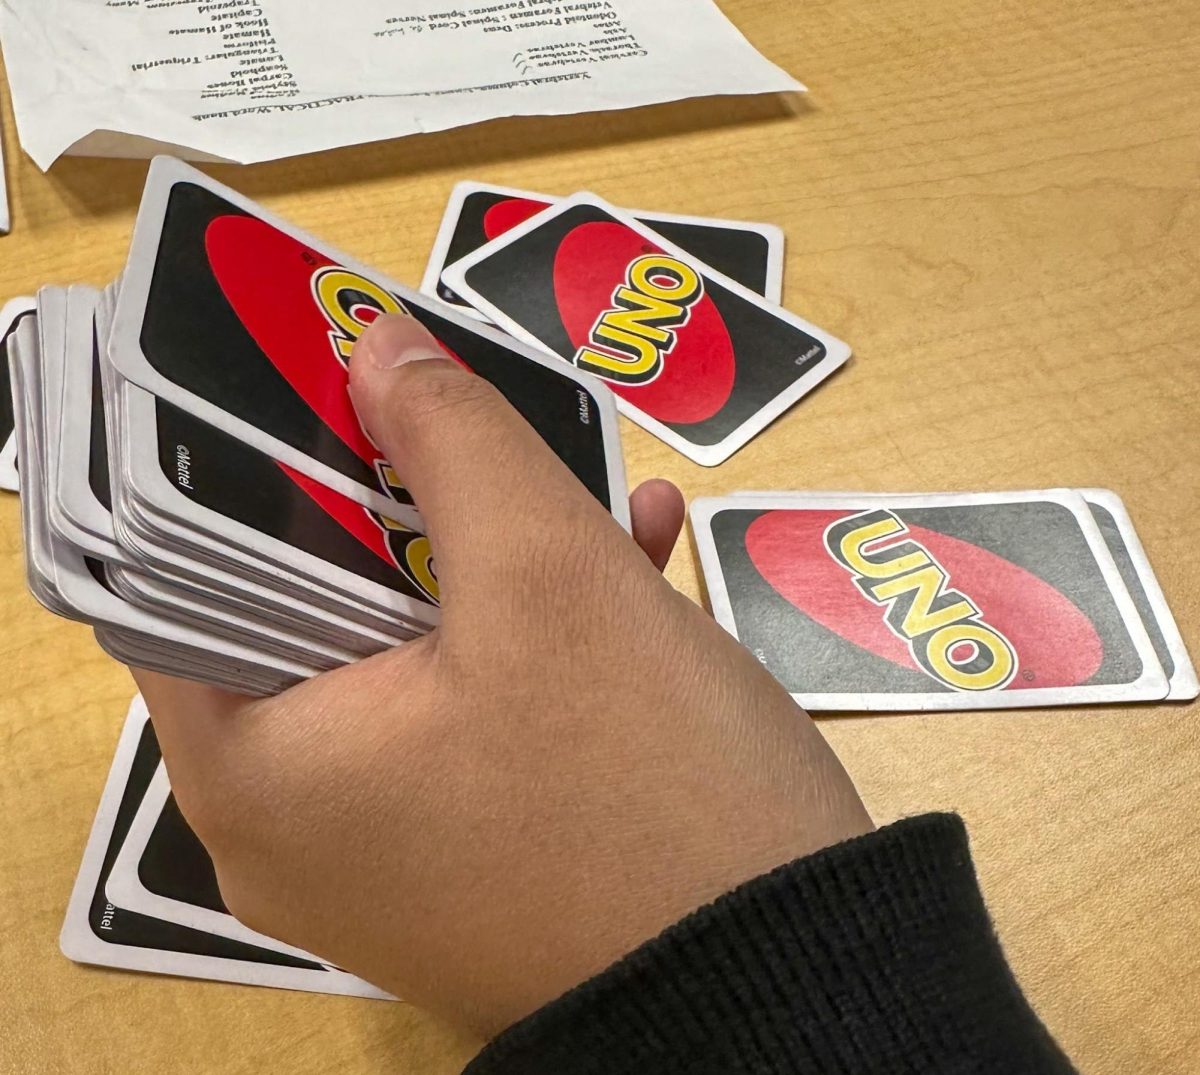 Uno at Lunch: A Classic Game Brings Comfort to Students